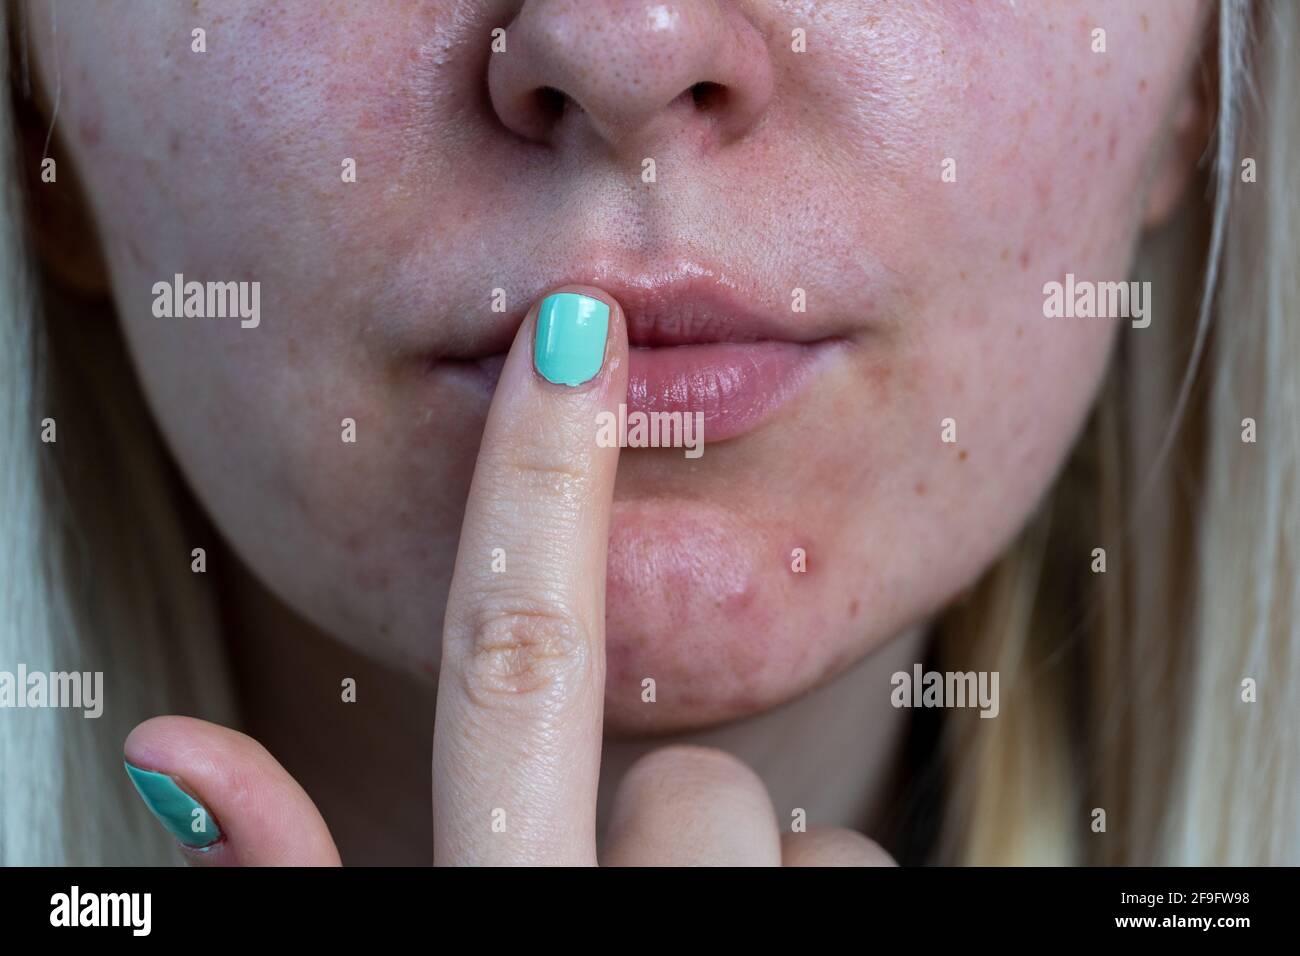 Part of a young woman's face with a virus herpes on lips, treatment with ointment. Young woman with cold sore applying cream onto lips Stock Photo